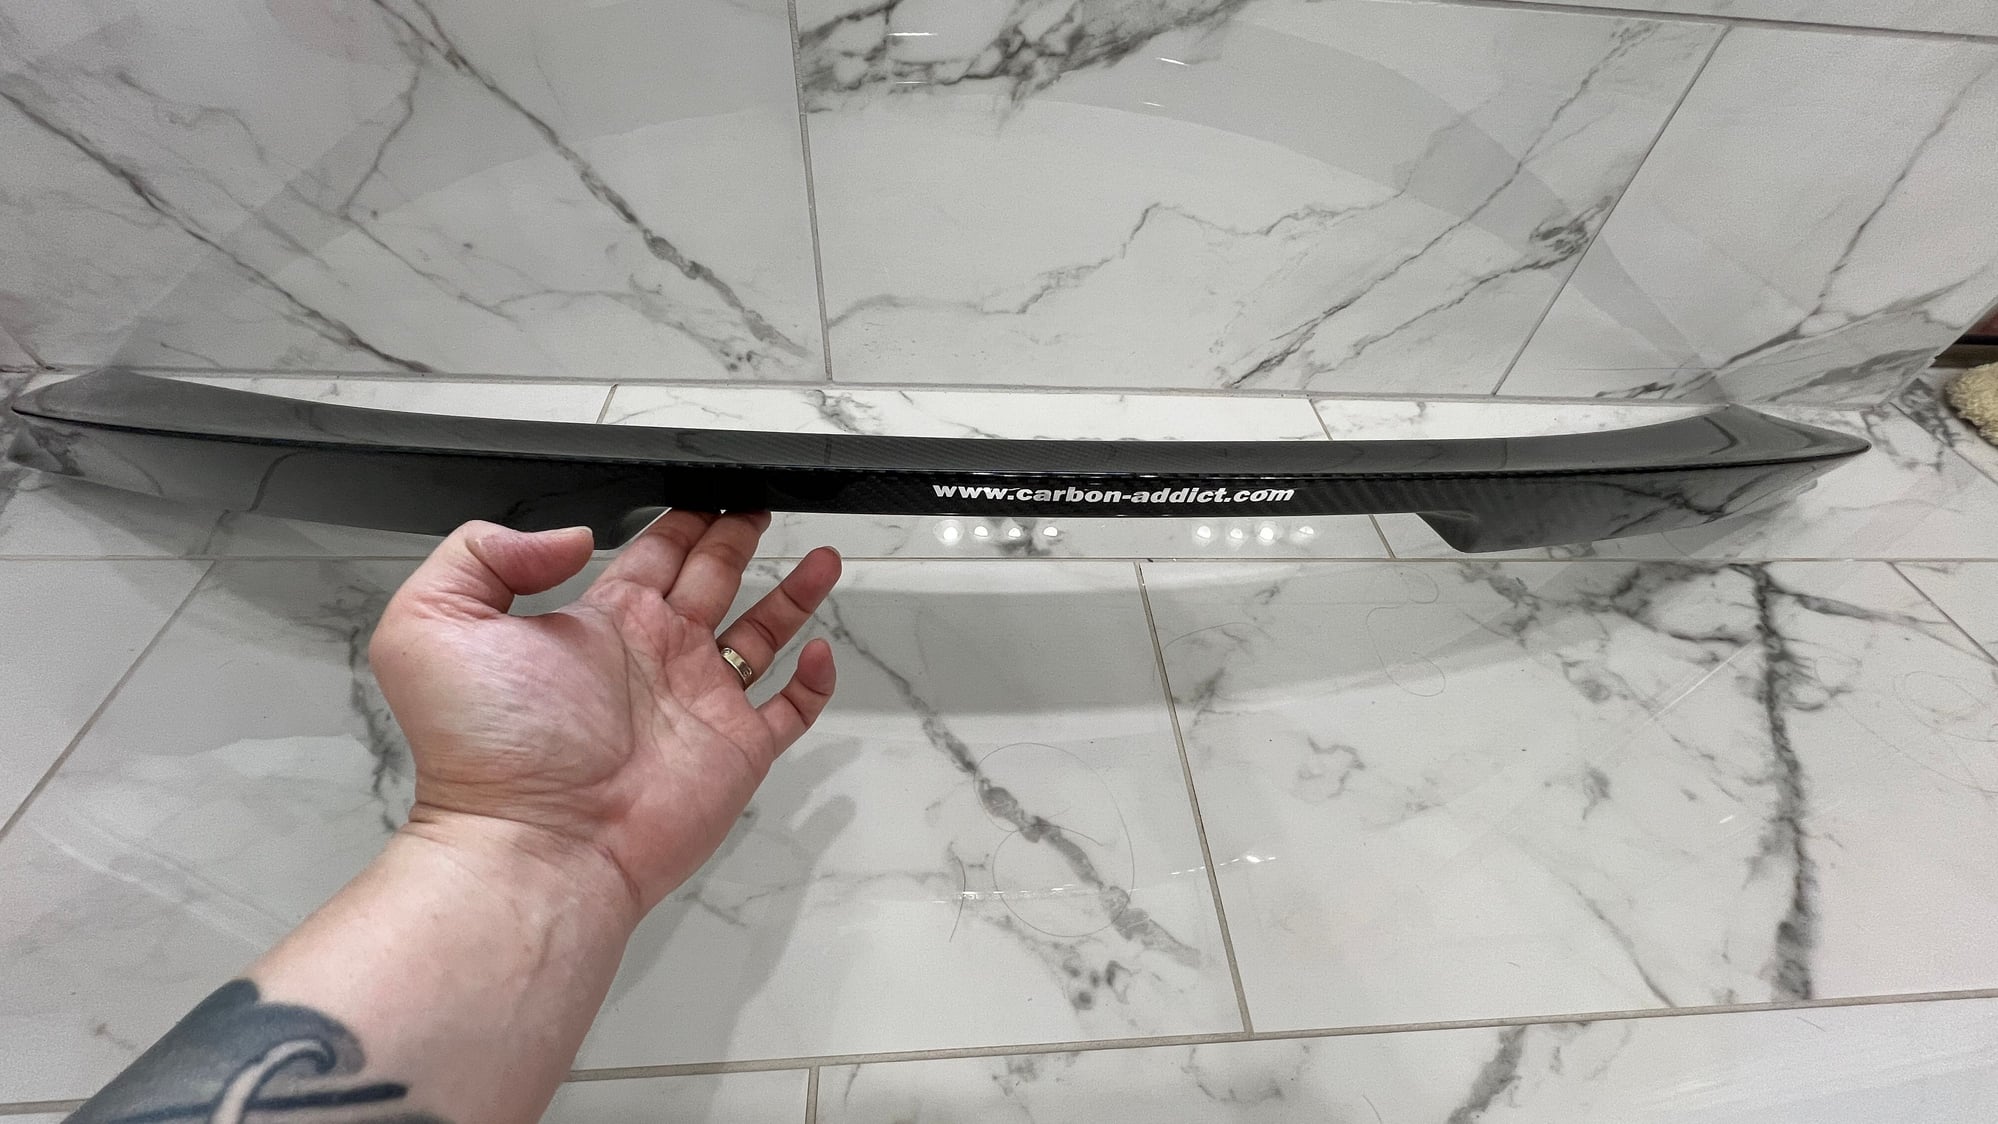 Accessories - LC500 Convertible Carbon Fiber Spoiler - Used - 2021 to 2025 Lexus LS500 - Cypress, TX 77429, United States